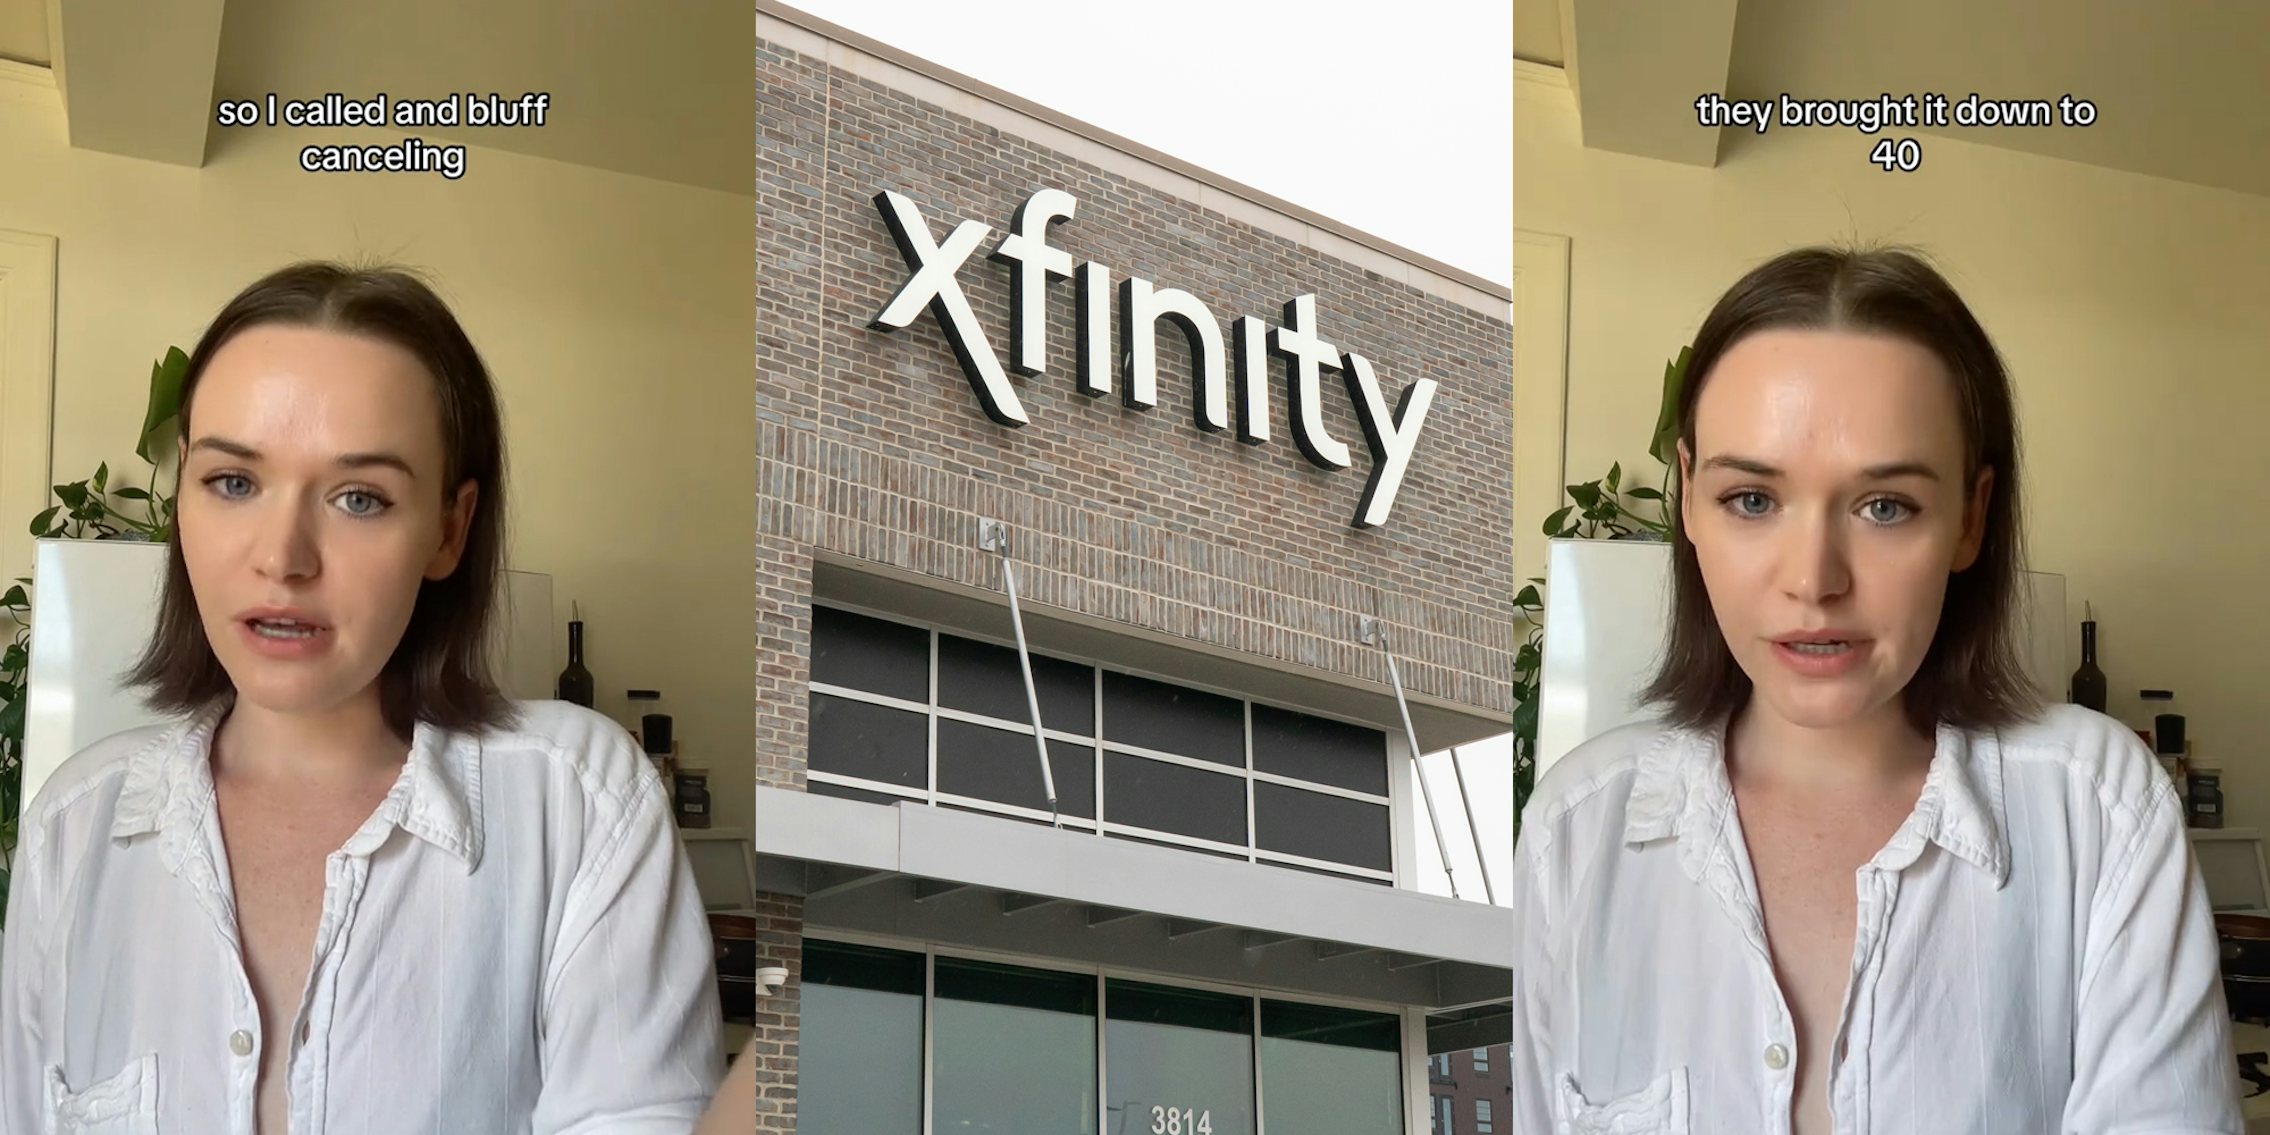 woman speaking with caption 'so I called and bluff canceling' (l) XFinity sign on building (c) woman speaking with caption 'they brought it down to 40' (r)